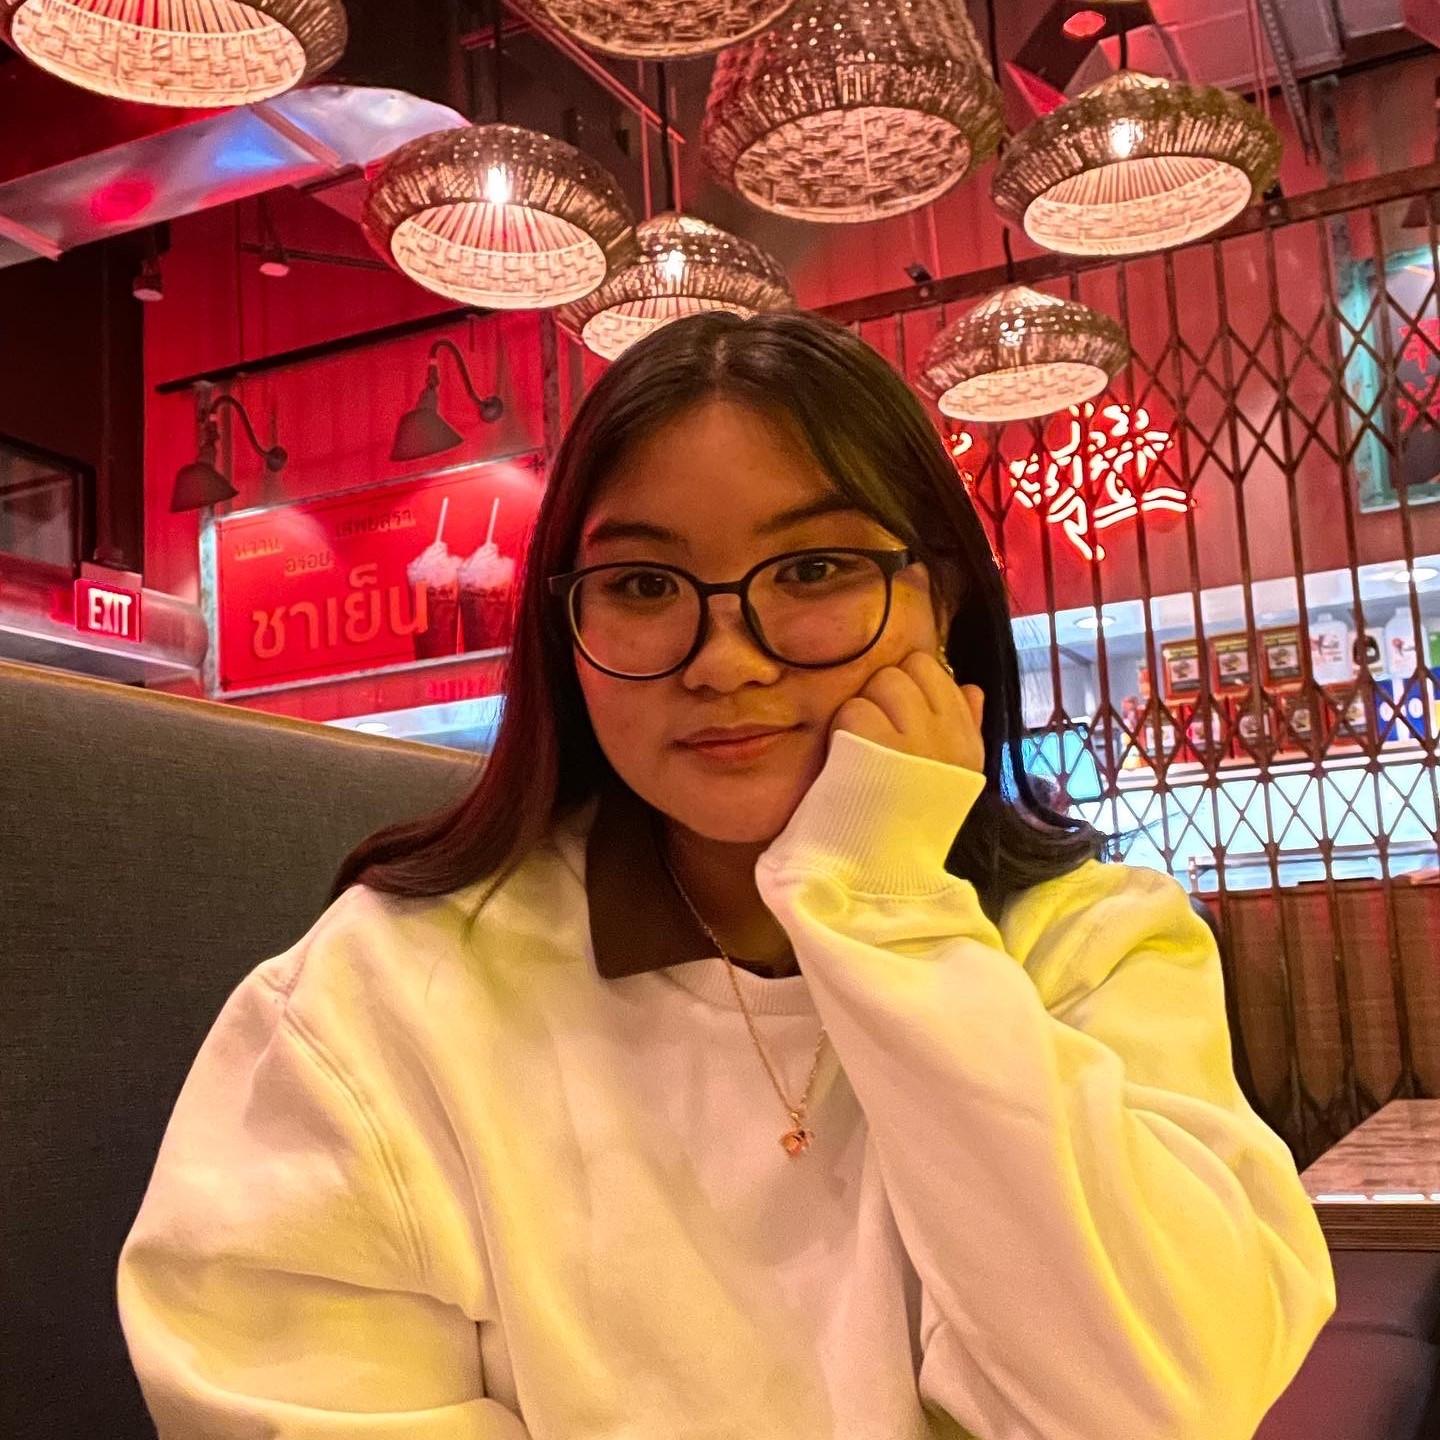 Grazelle is smiling in a white sweatshirt, eating at Hawkers Asian Street Food in Bethesda, MD